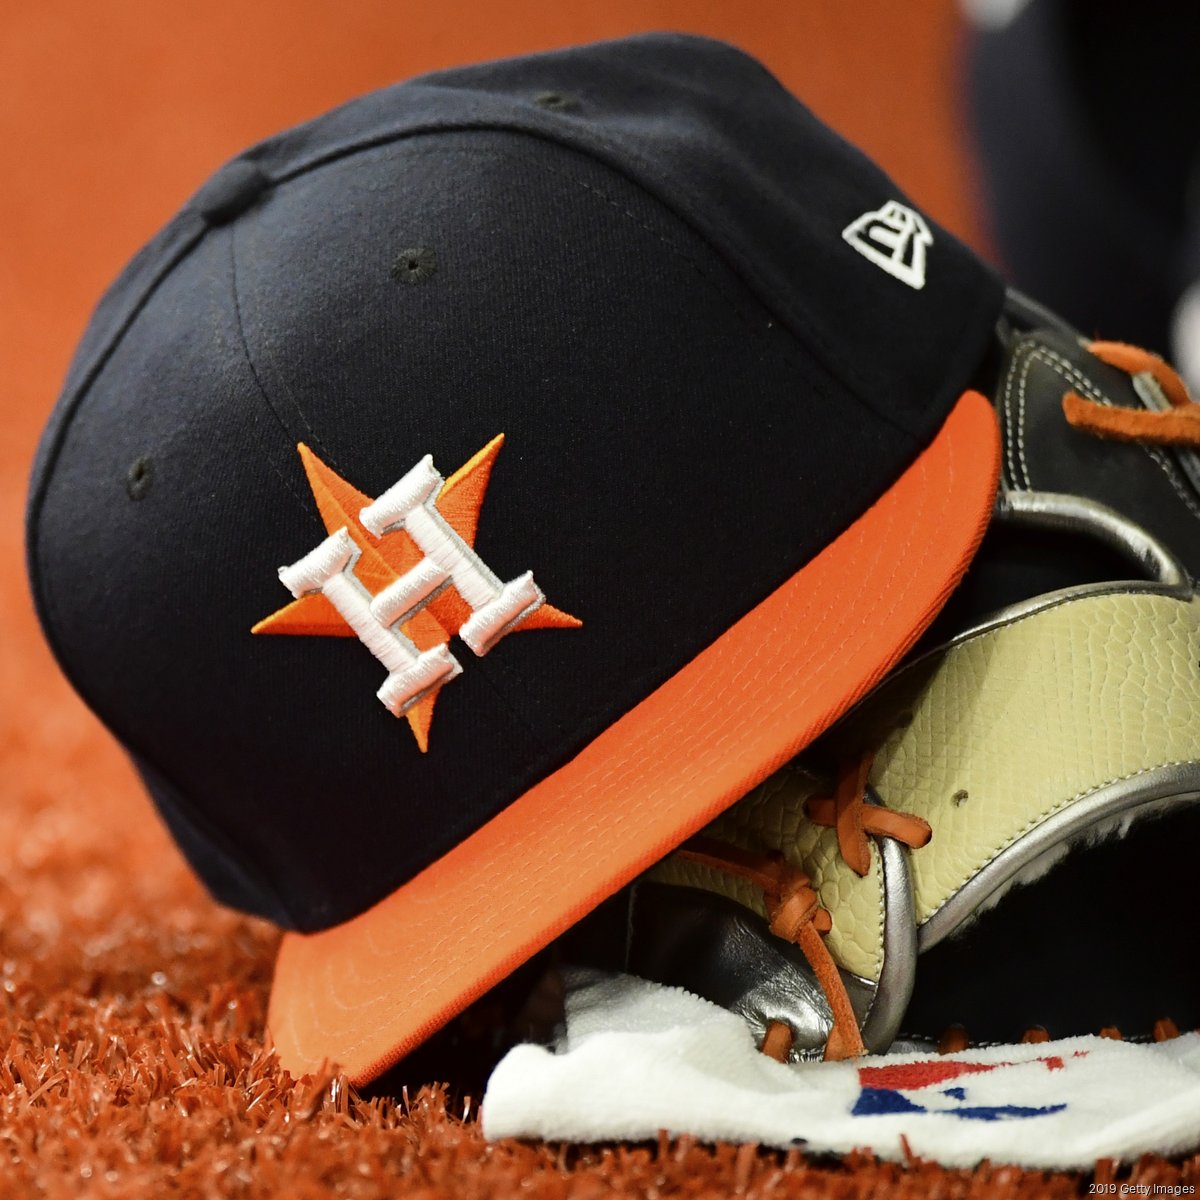 MLB roundup: Astros clinch AL West title for fifth time in six years